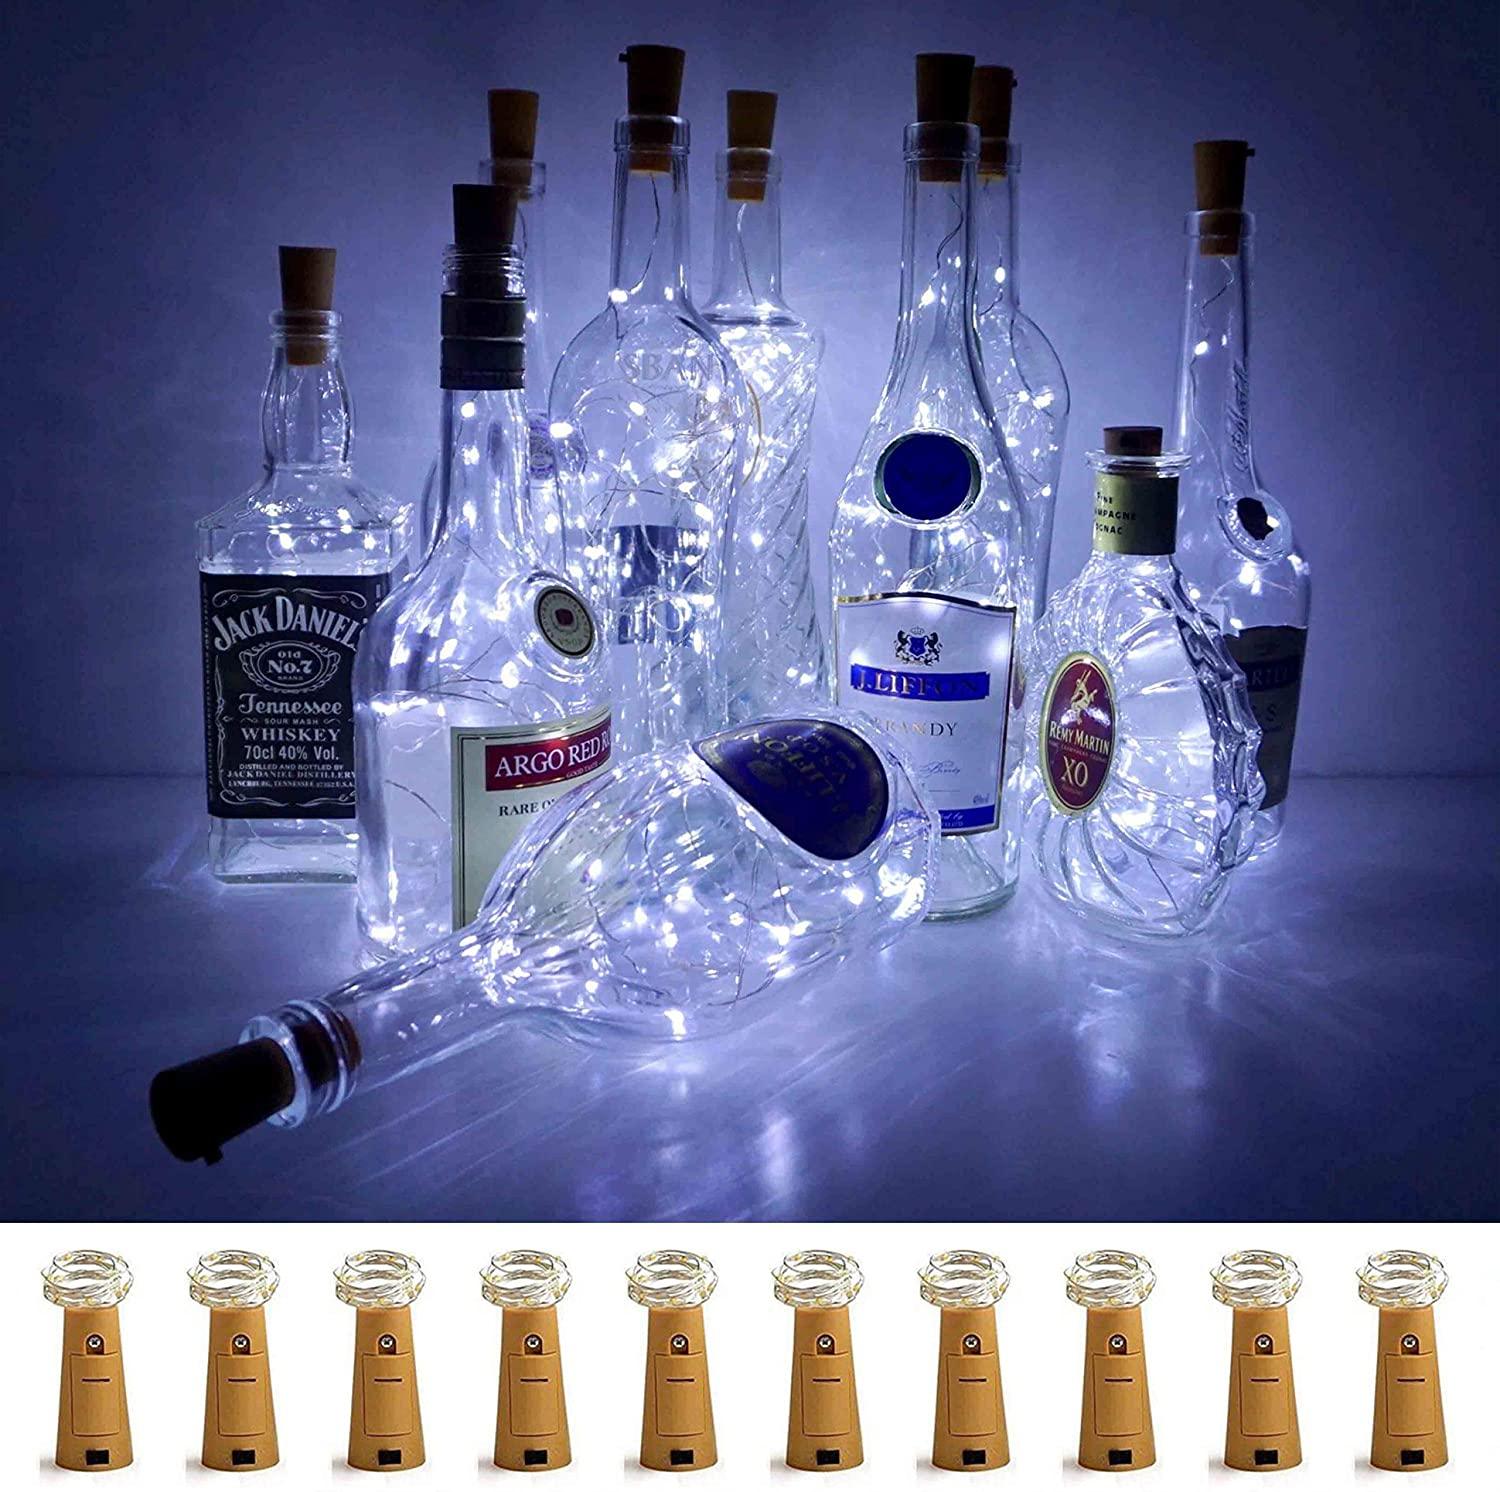 Wine Bottle Cork Lights10 LED/ 40 Inches Battery Operated Cork Shape Copper Wire Colorful Fairy Mini String Lights - Decotree.co Online Shop